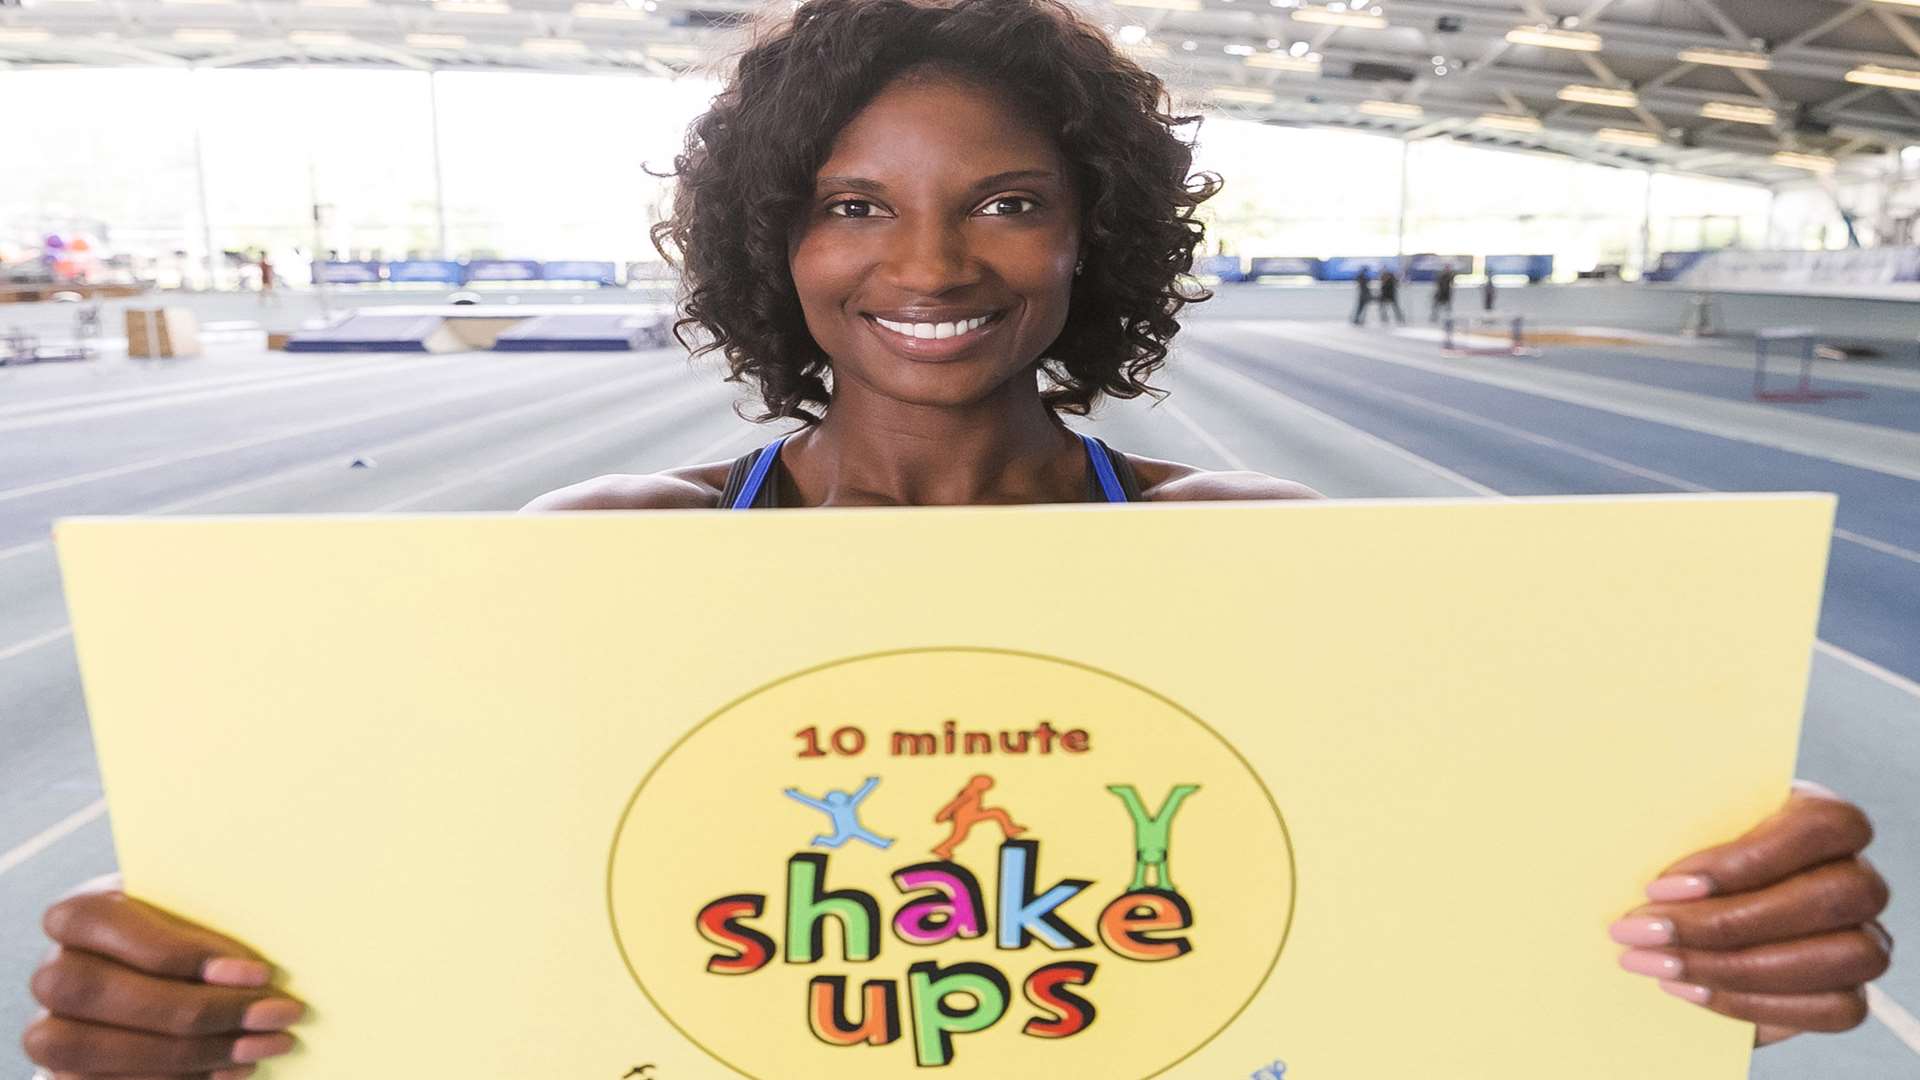 Denise Lewis, who has joined forces with Change4Life, Sport England and Disney to encourage kids to try 10 Minute Shake Ups